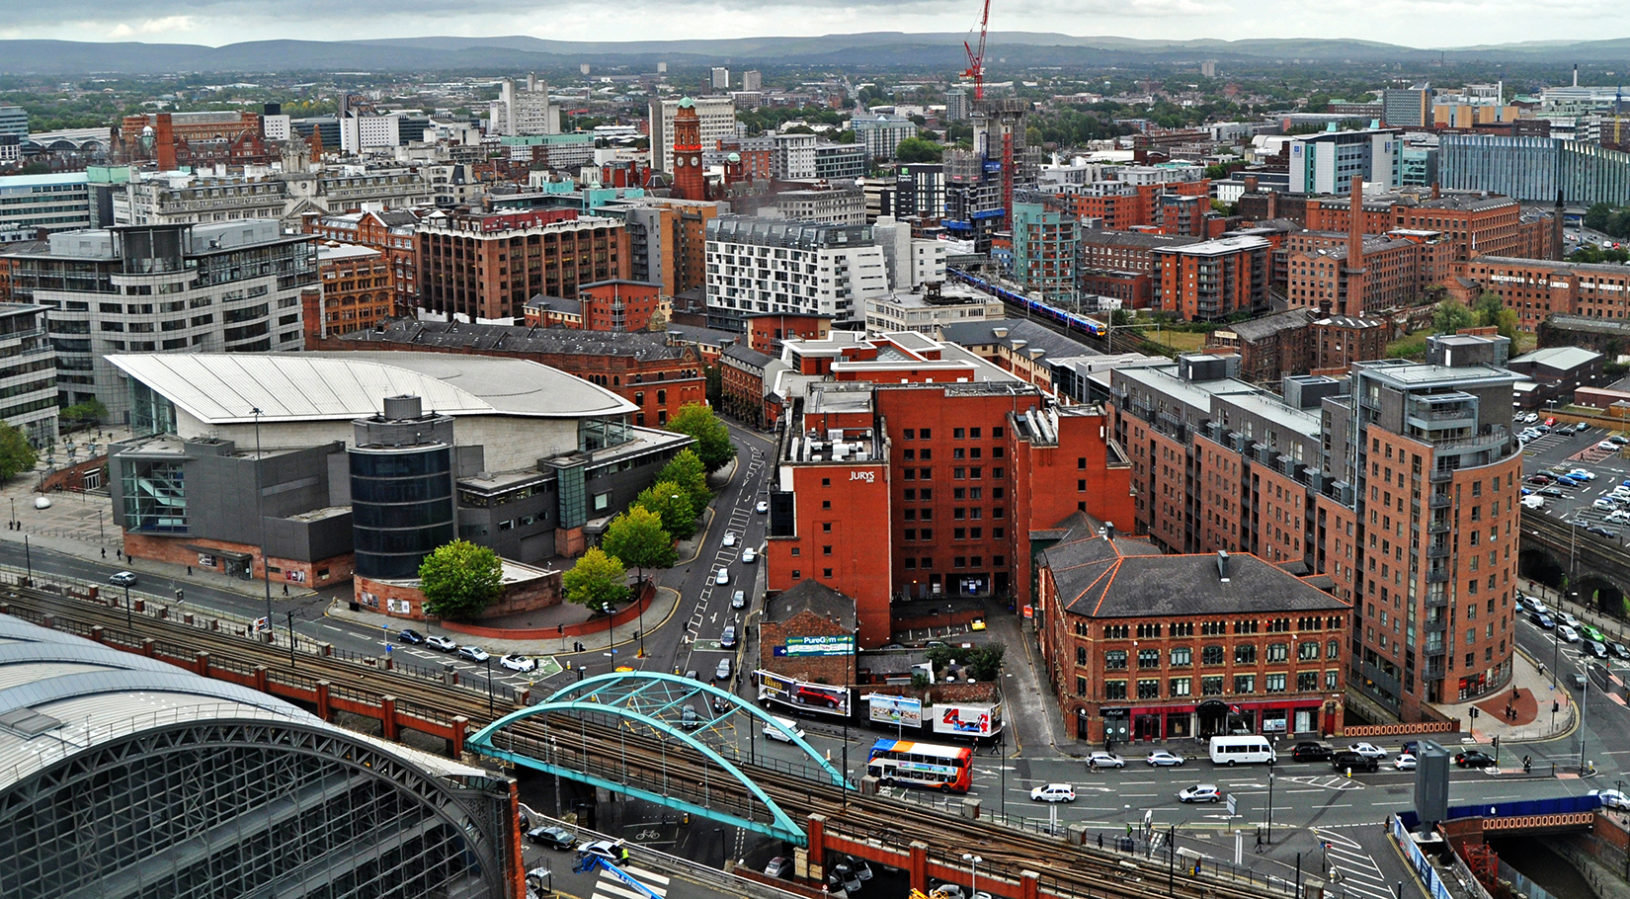 Image of Greater Manchester